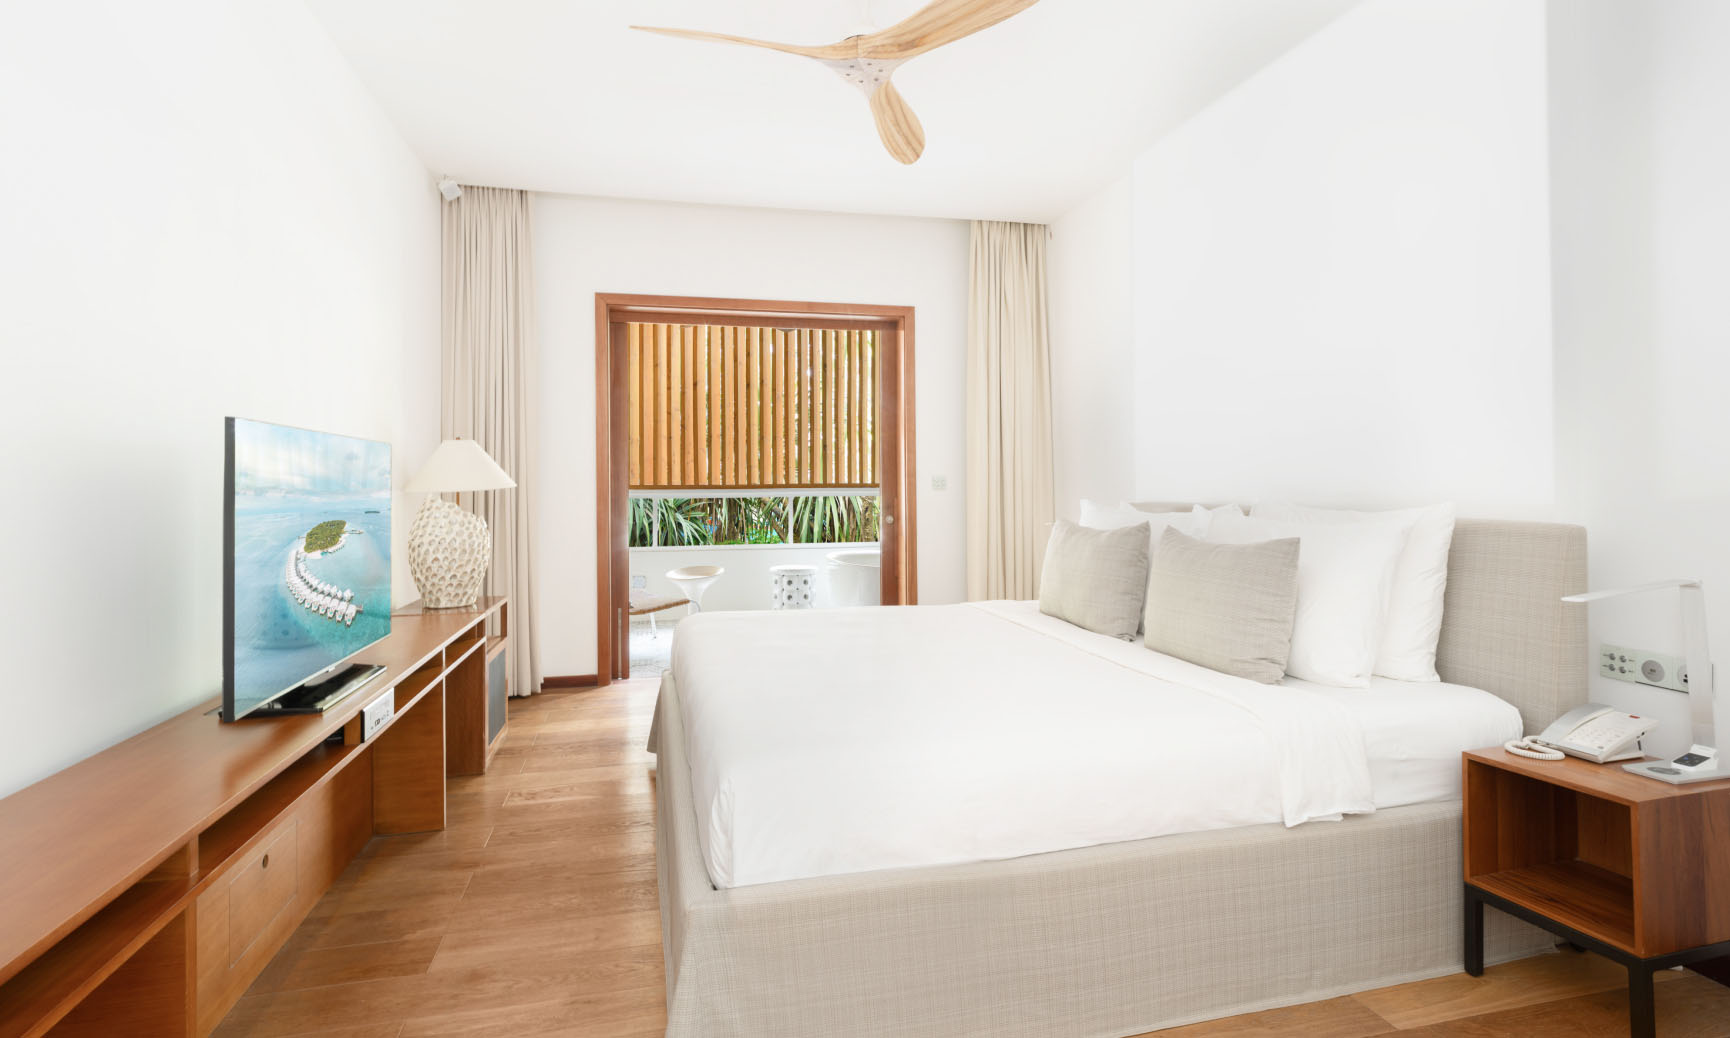 A guest suite with a king bed and private balcony in our 4 bedroom villa in the Maldives.